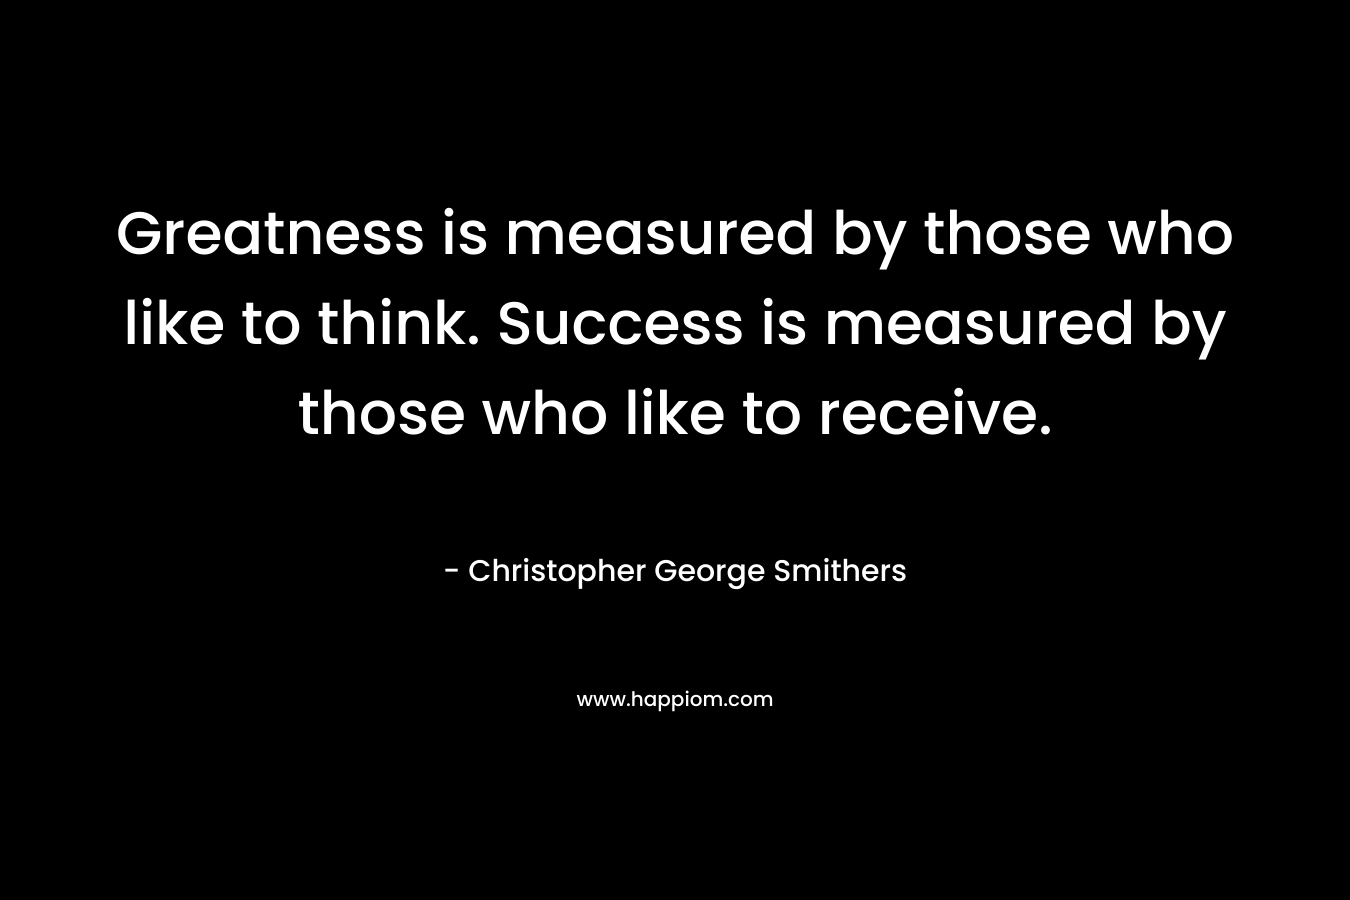 Greatness is measured by those who like to think. Success is measured by those who like to receive.